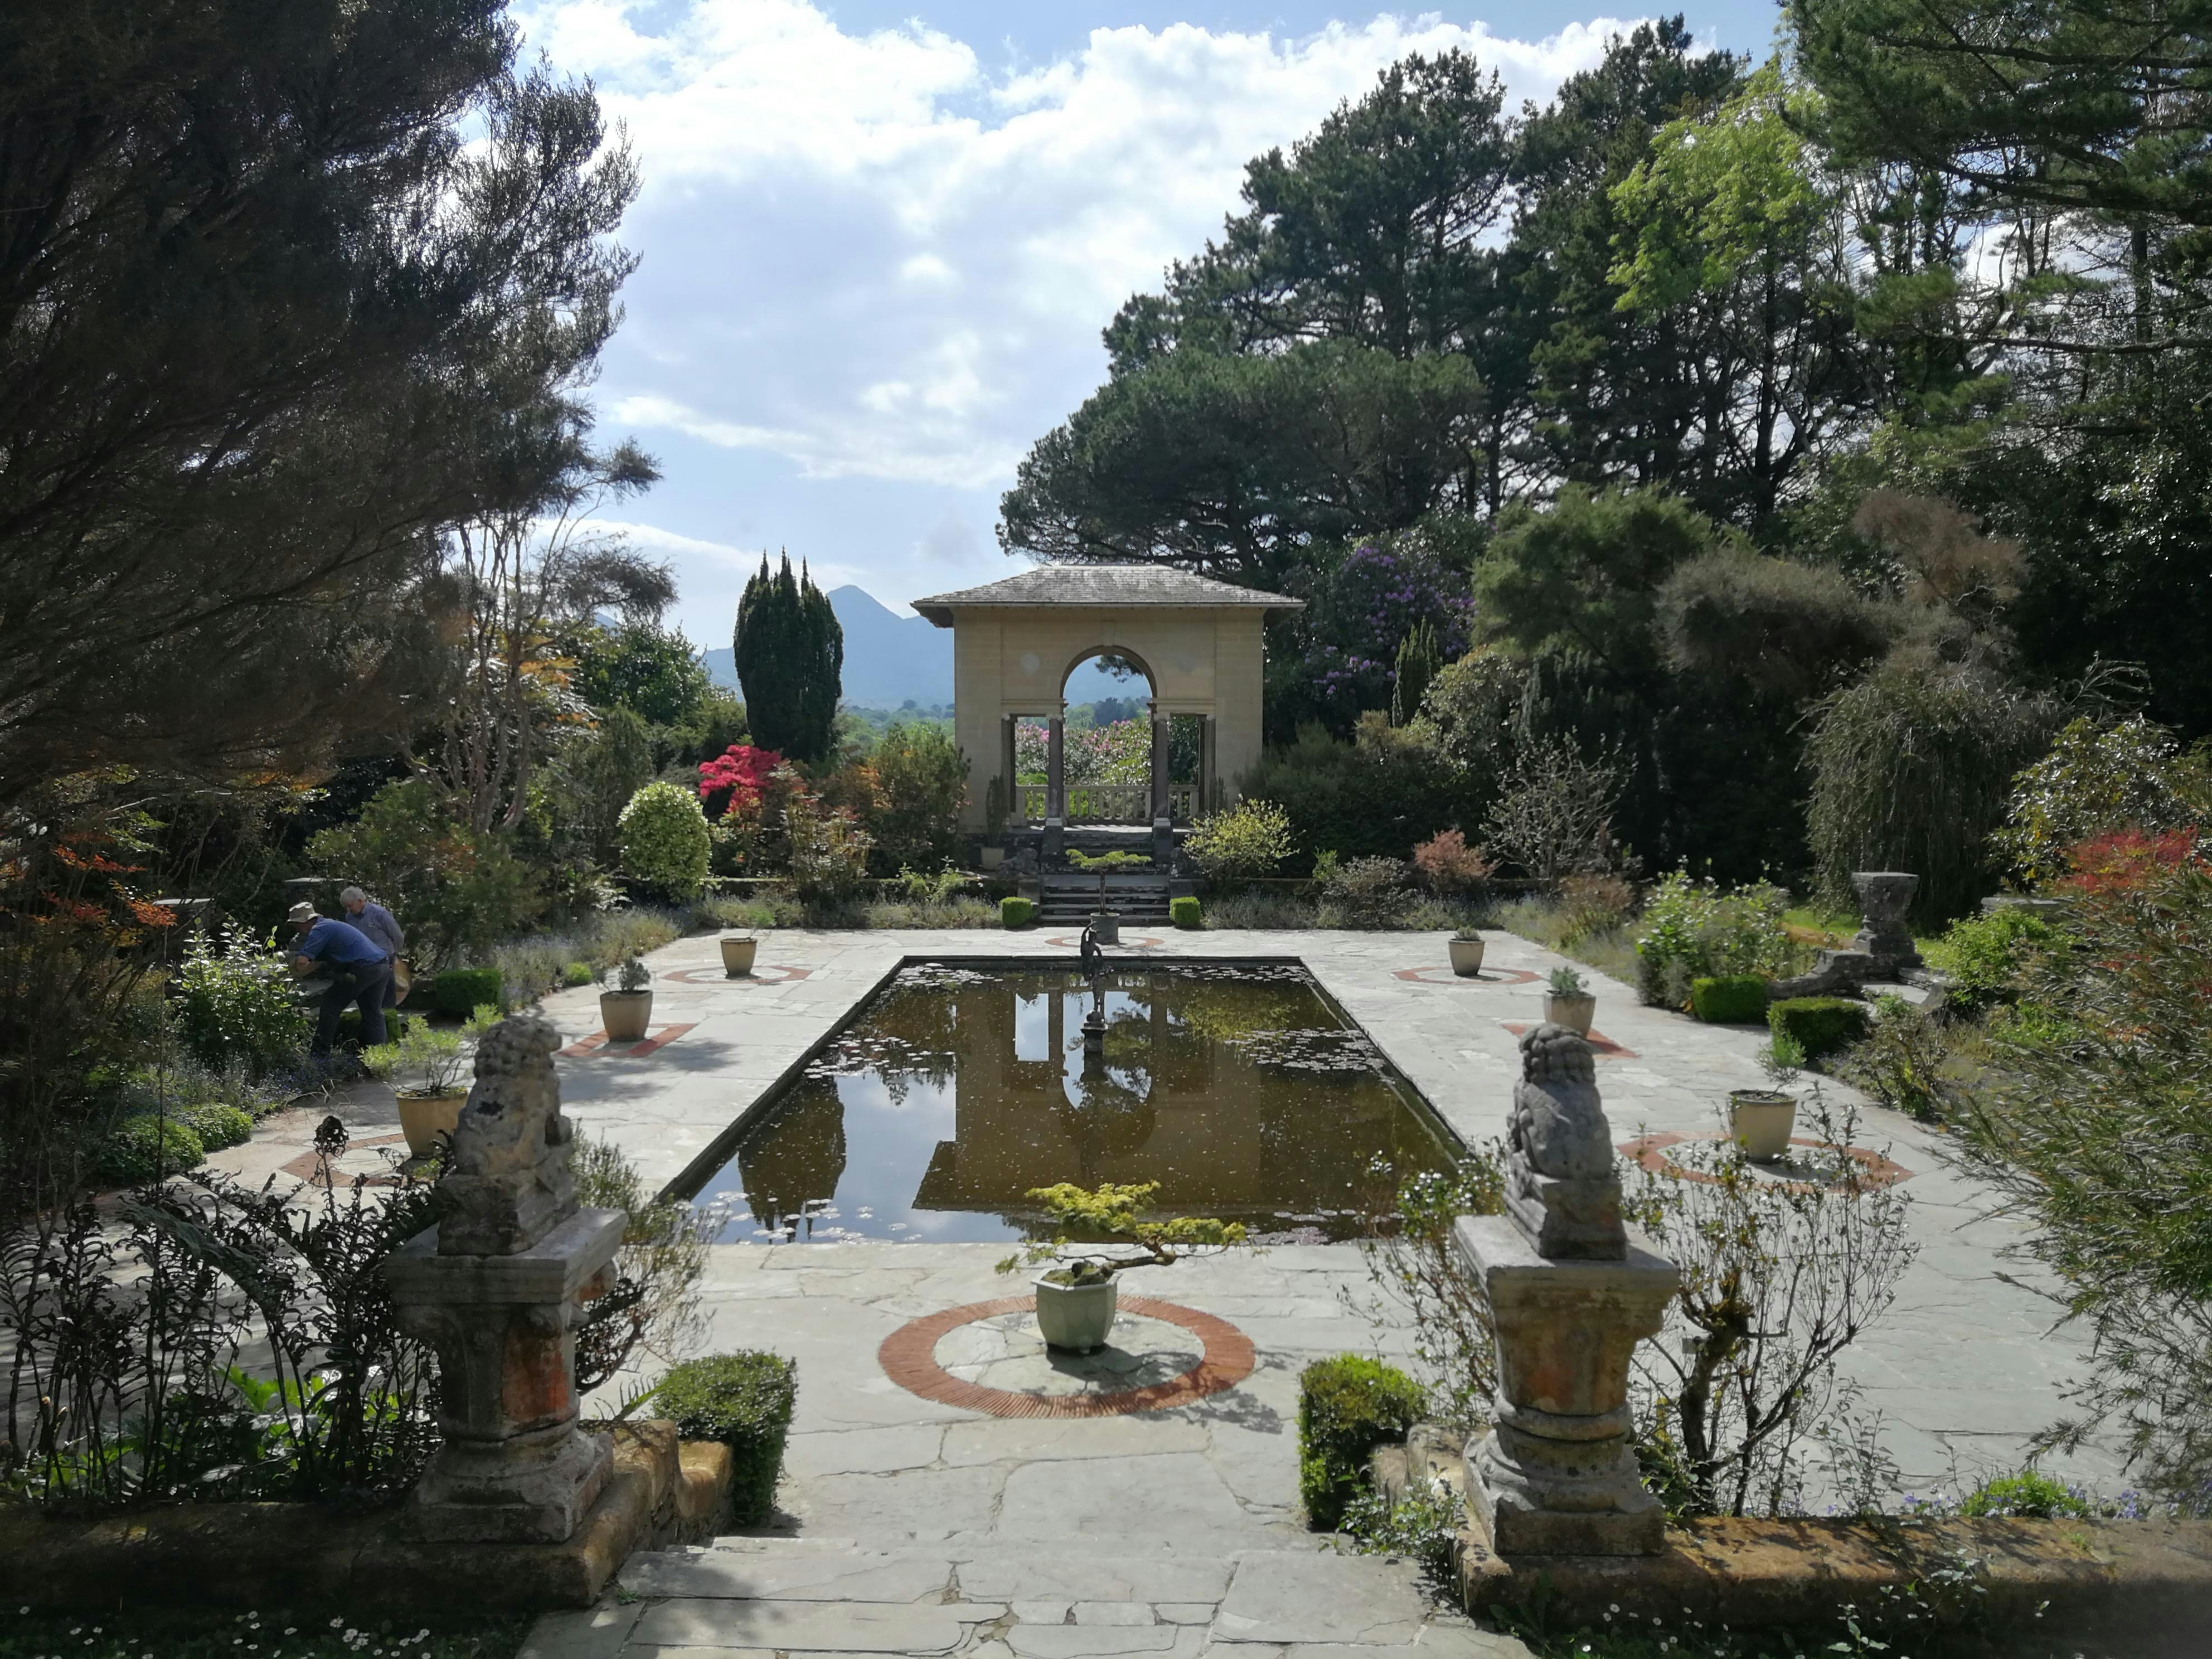 A variety of trees in different shades of green surround a Mediterranean-style terrace that has an attractive sandstone arch at one end, and a rectangular pond stretching towards it.